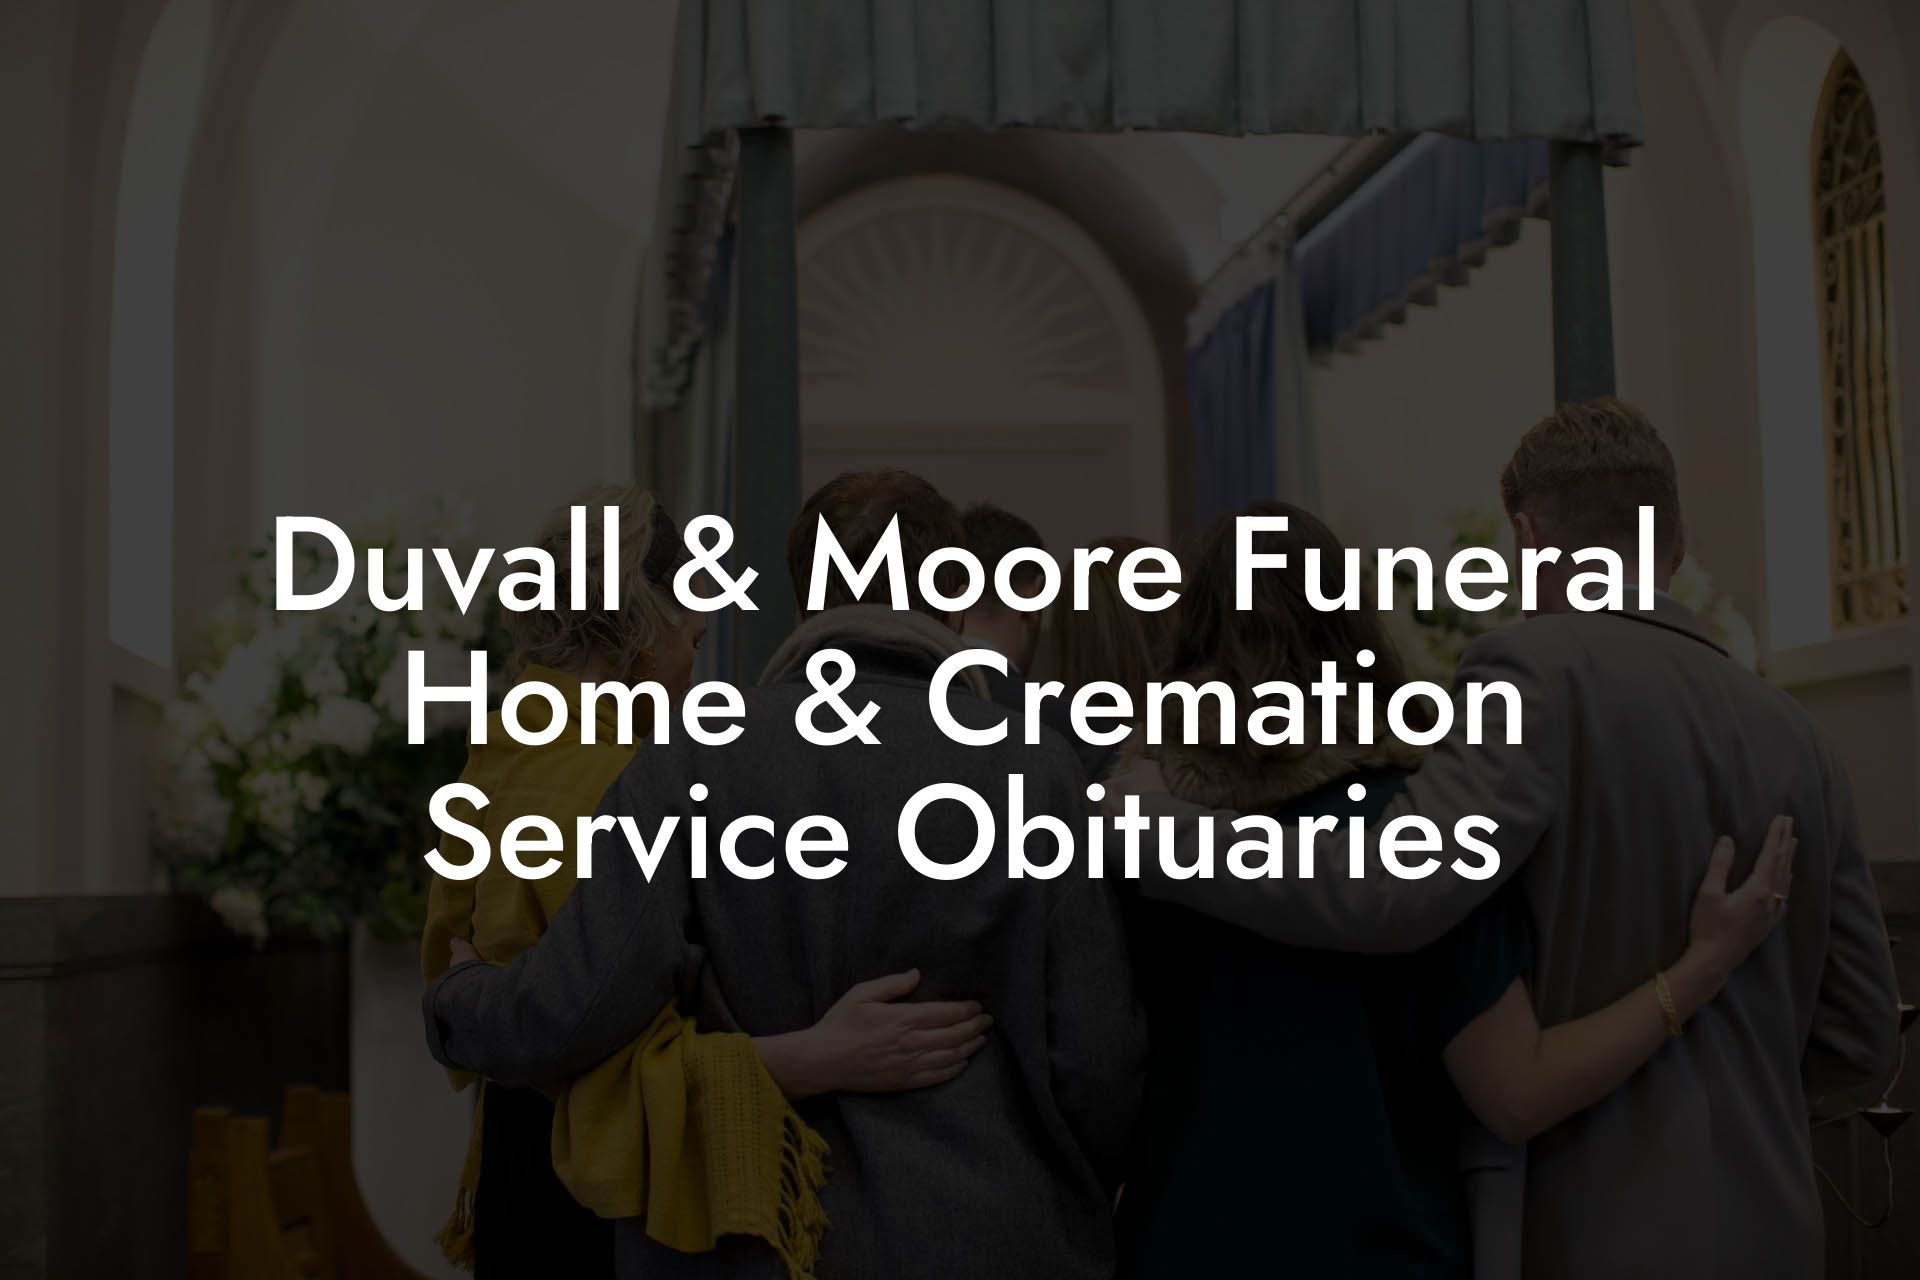 Duvall & Moore Funeral Home & Cremation Service Obituaries